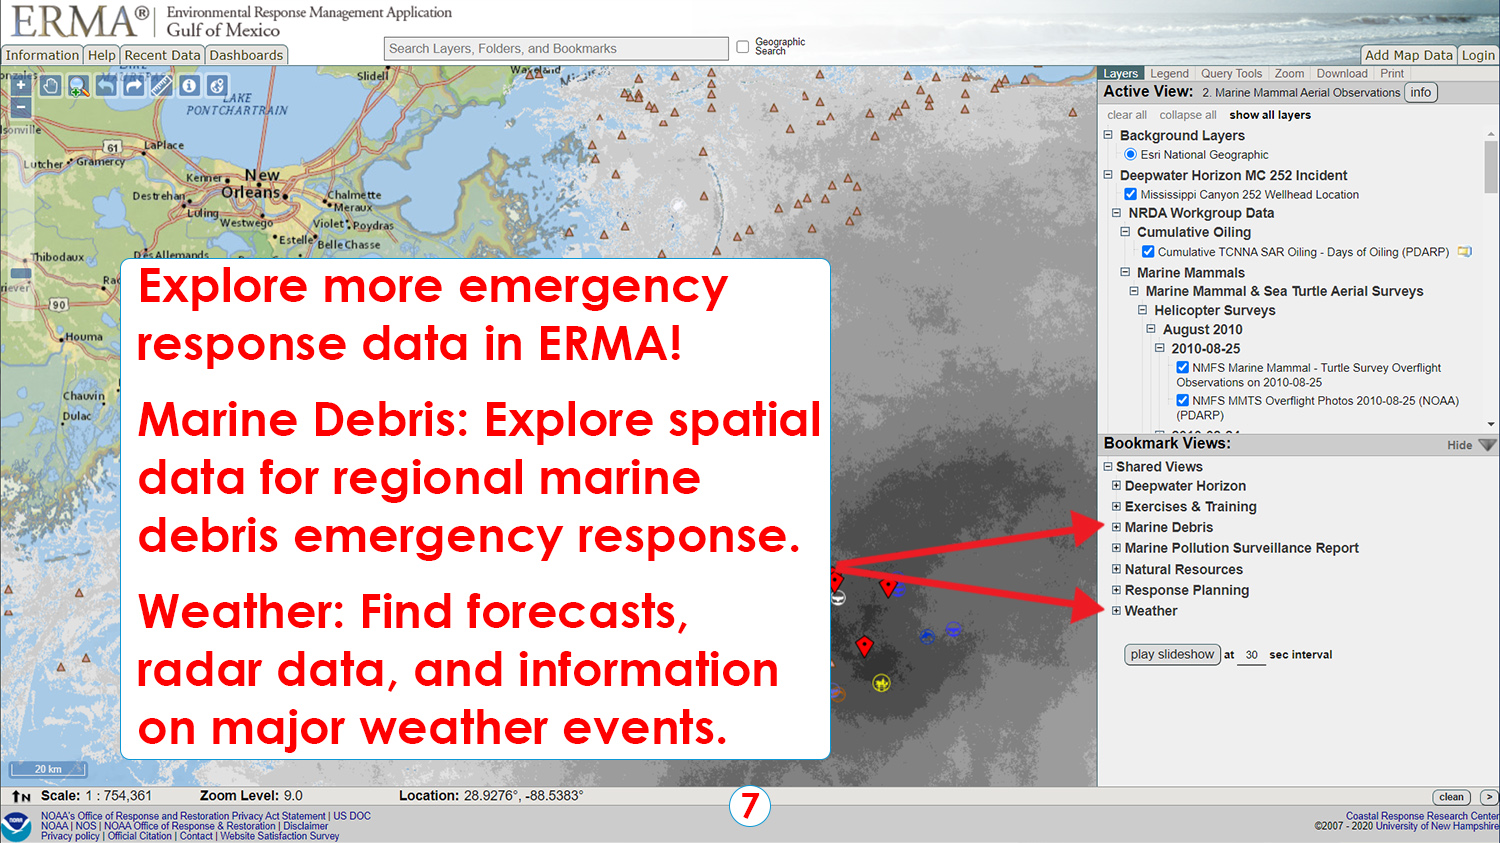 Step 7: Explore more emergency response data in ERMA!
Marine Debris: Explore spatial data for regional marine debris emergency response.
Weather: Find forecasts, radar data, and information on major weather events.